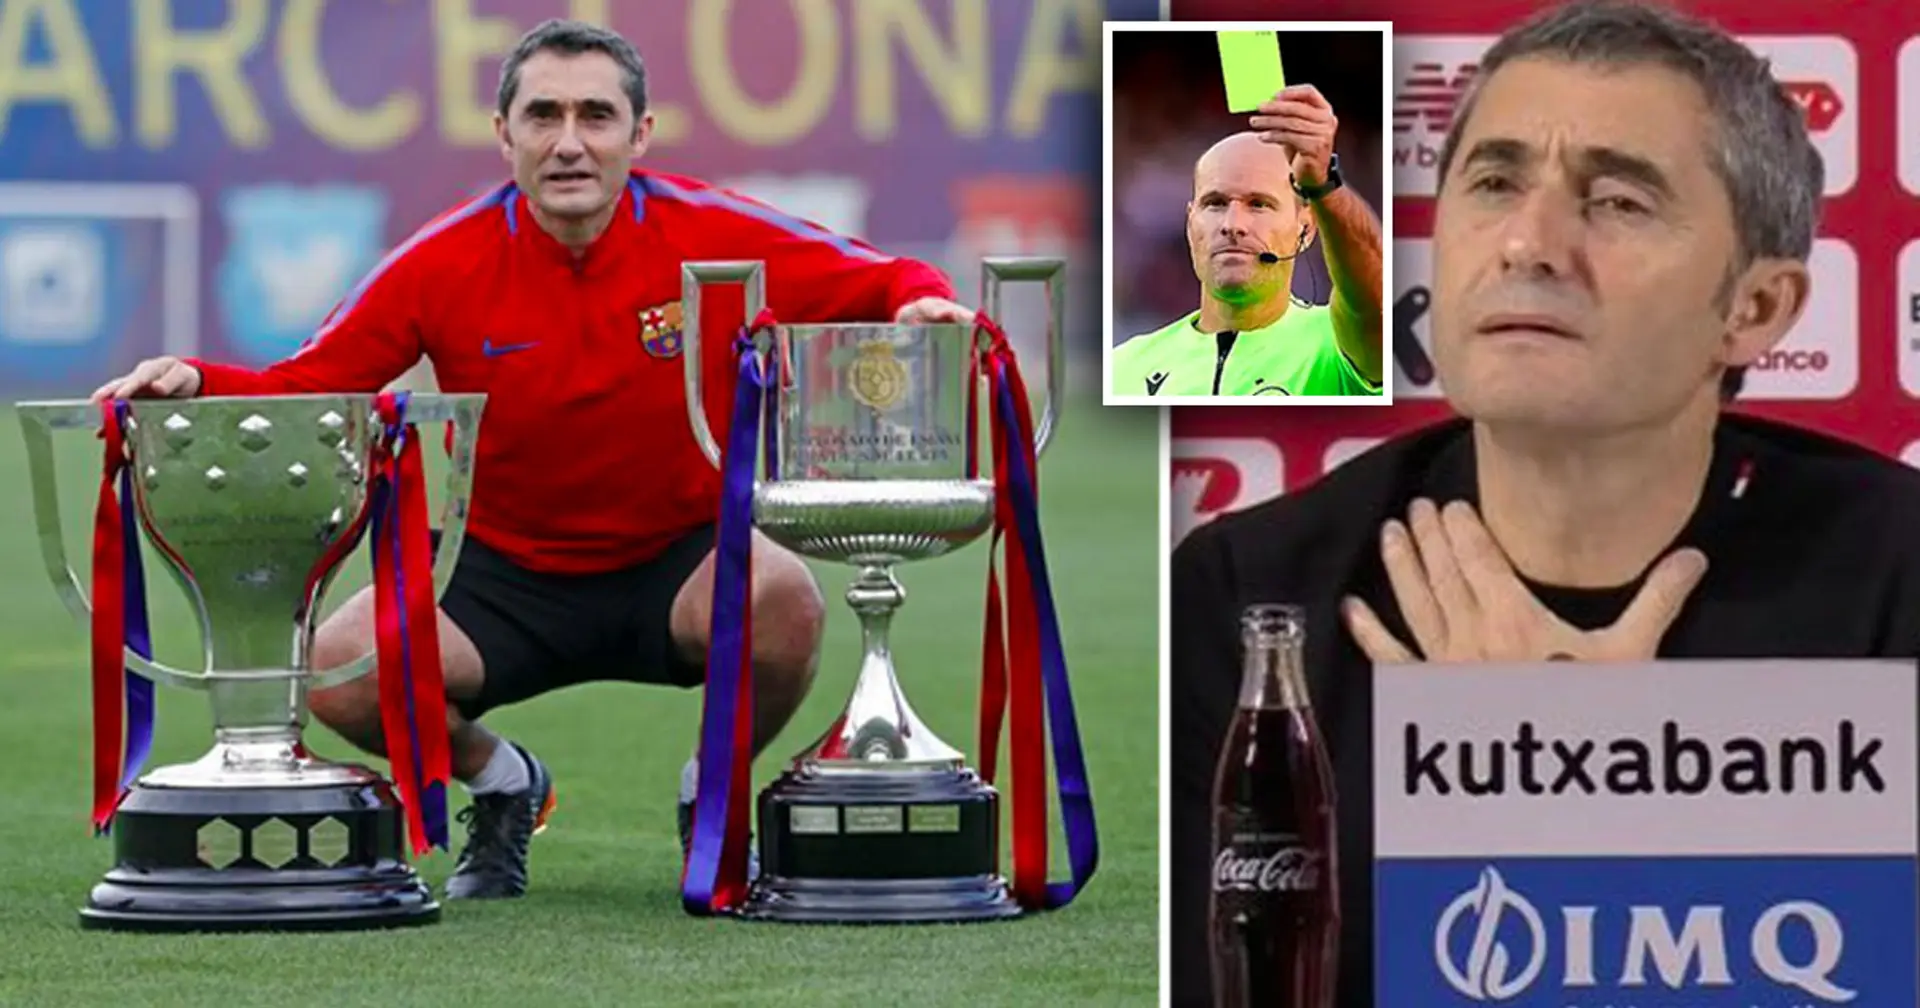 Journalist asks Valverde if Barca won 2017/18 La Liga only because of referees – his answer is top class